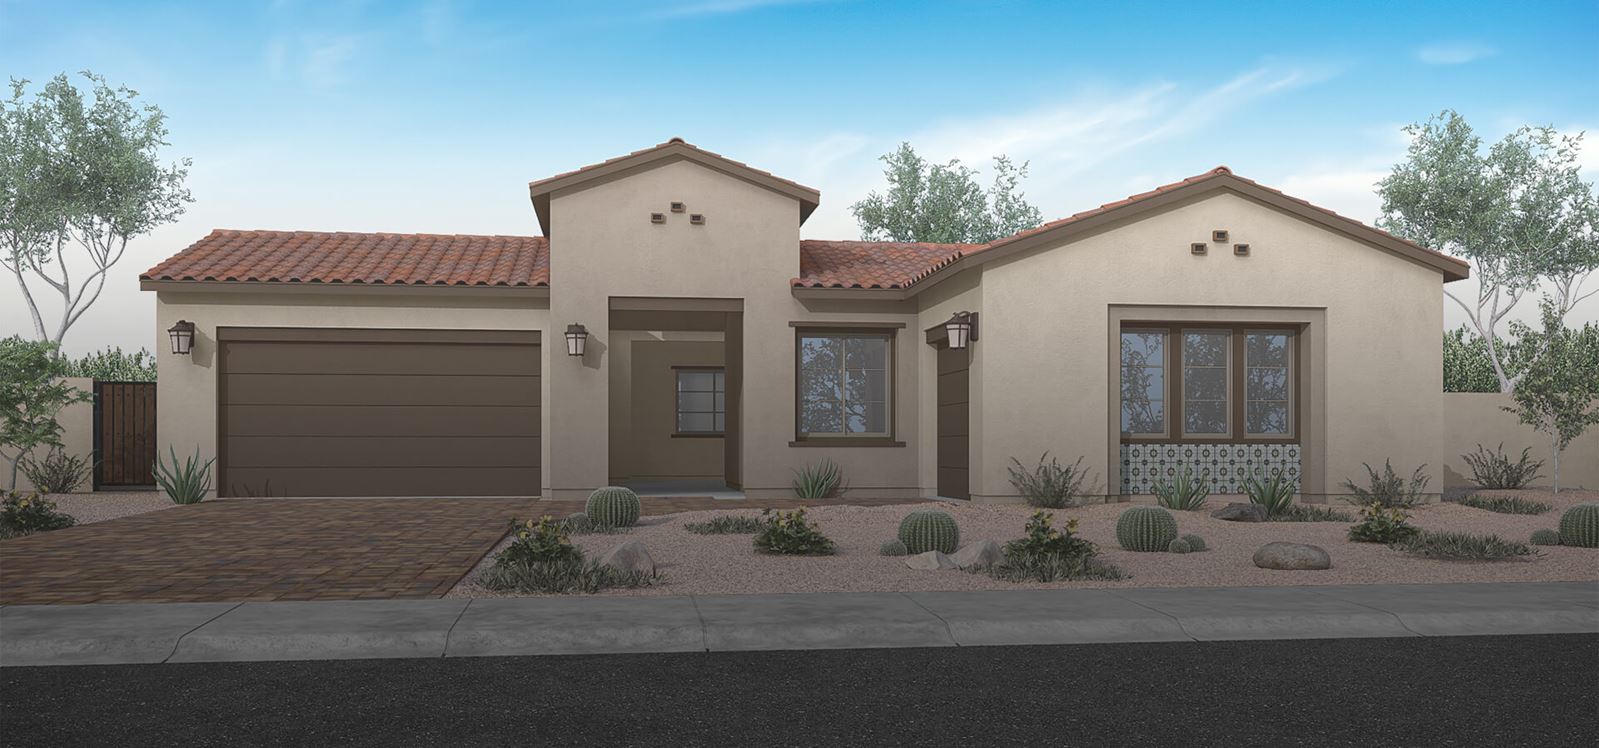 New Home Rendering for Blossom Rock Community | New Homes in East Valley AZ